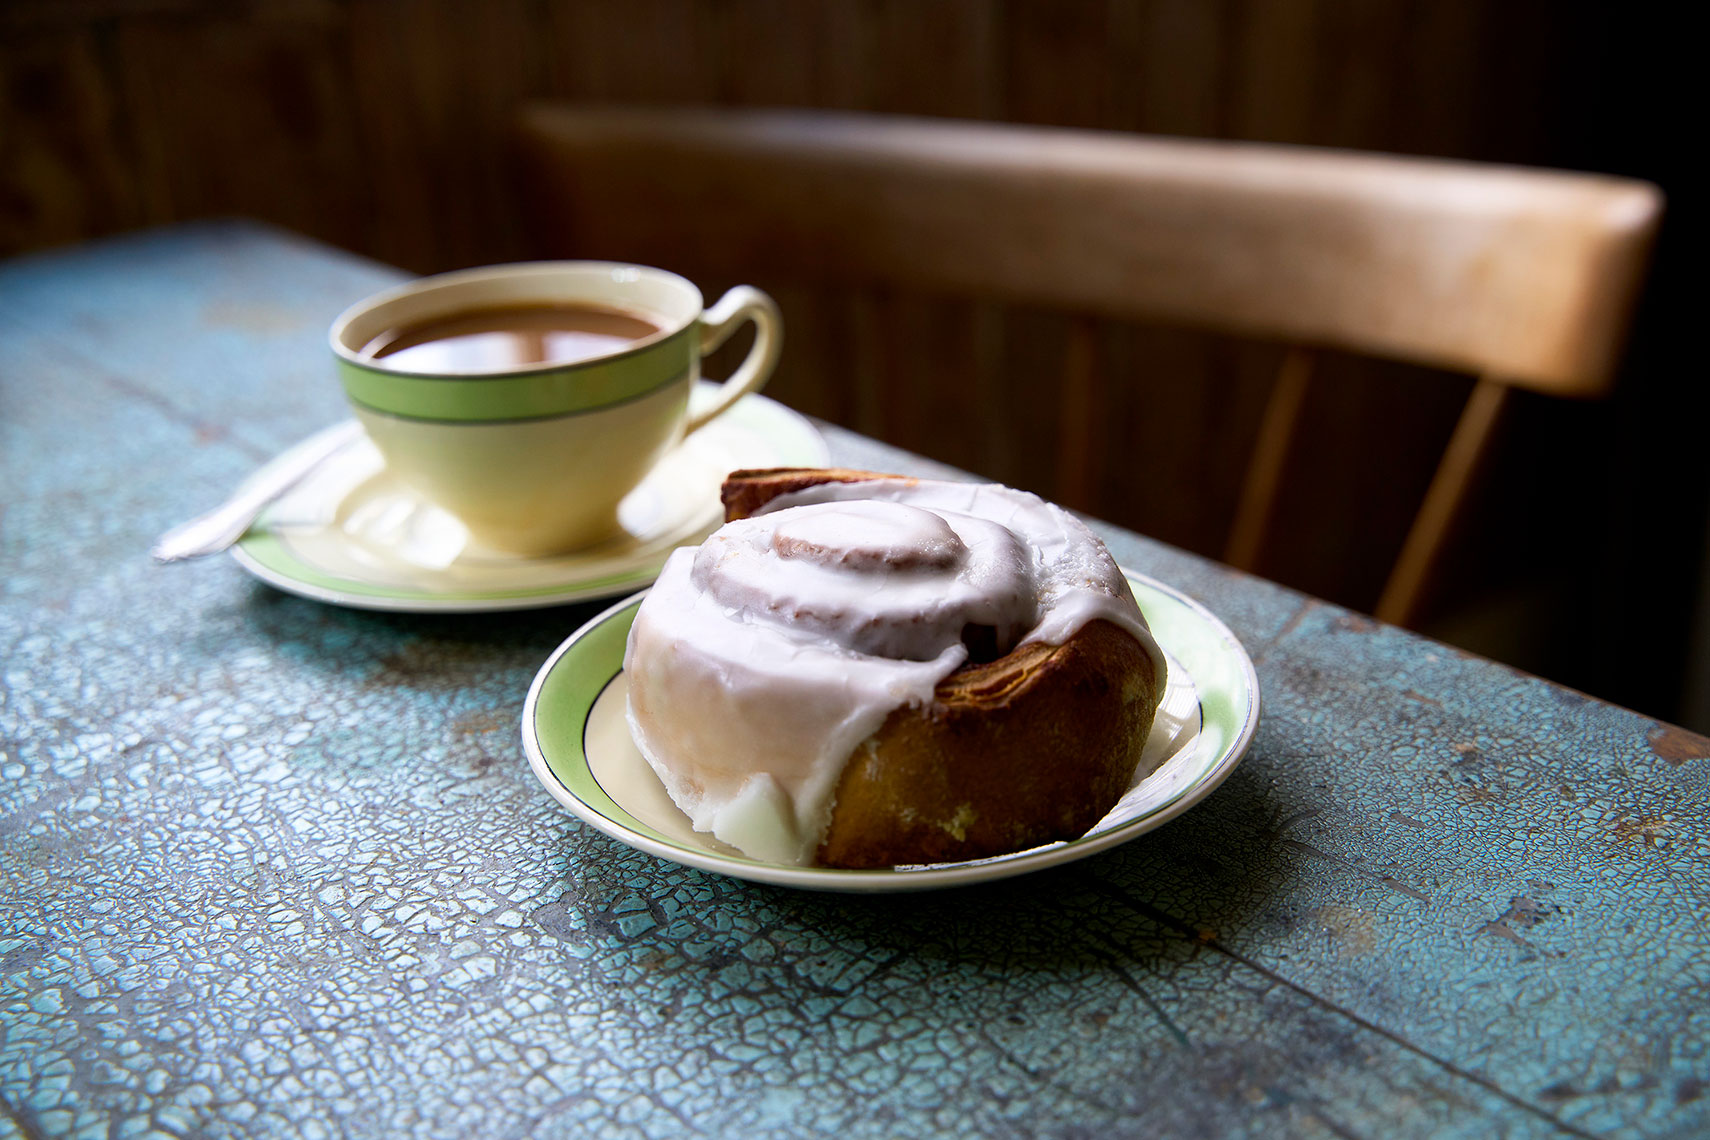 Editorial Photo of Sweet Rolls  From Bywater Bakery.